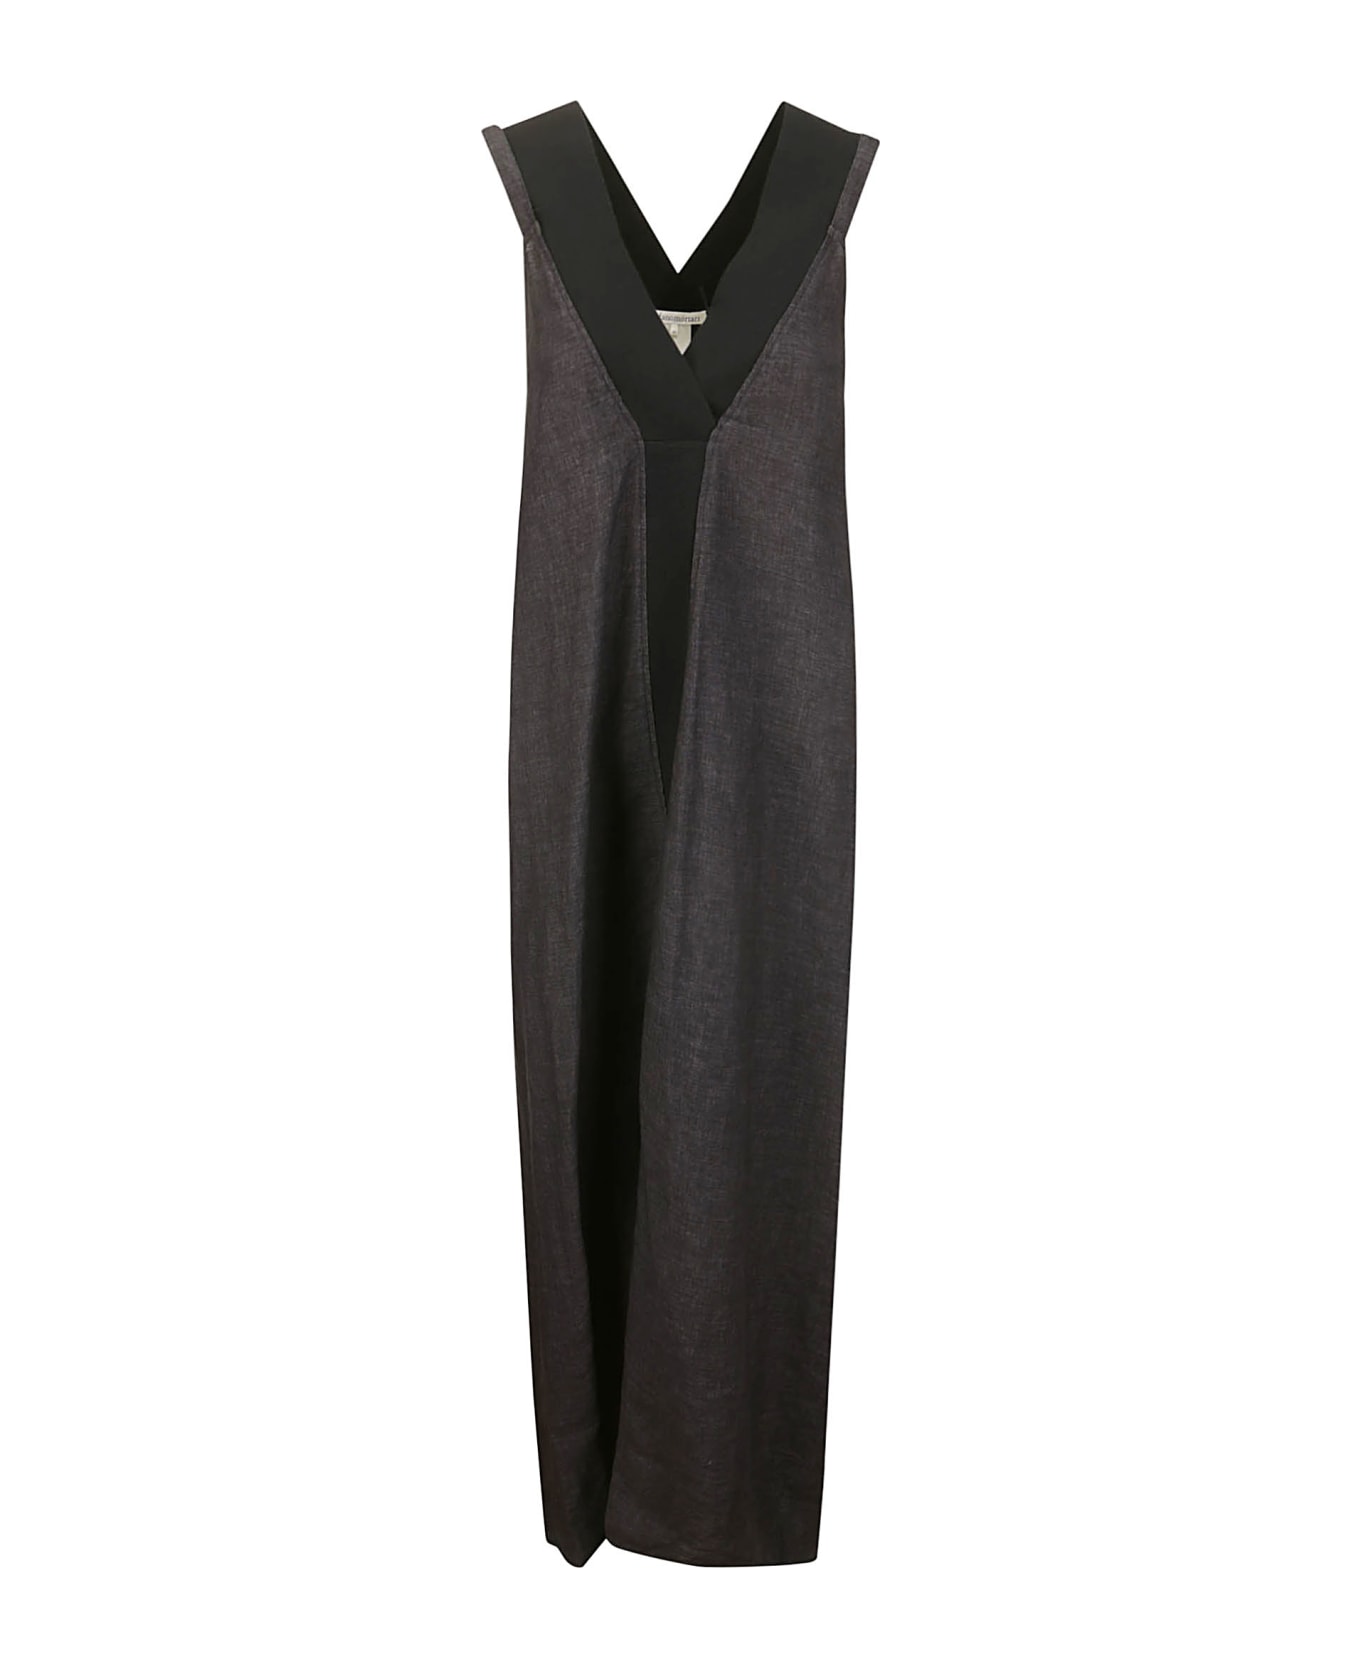 Stefano Mortari Linen Dress With Crossover Back - ANTHRACITE